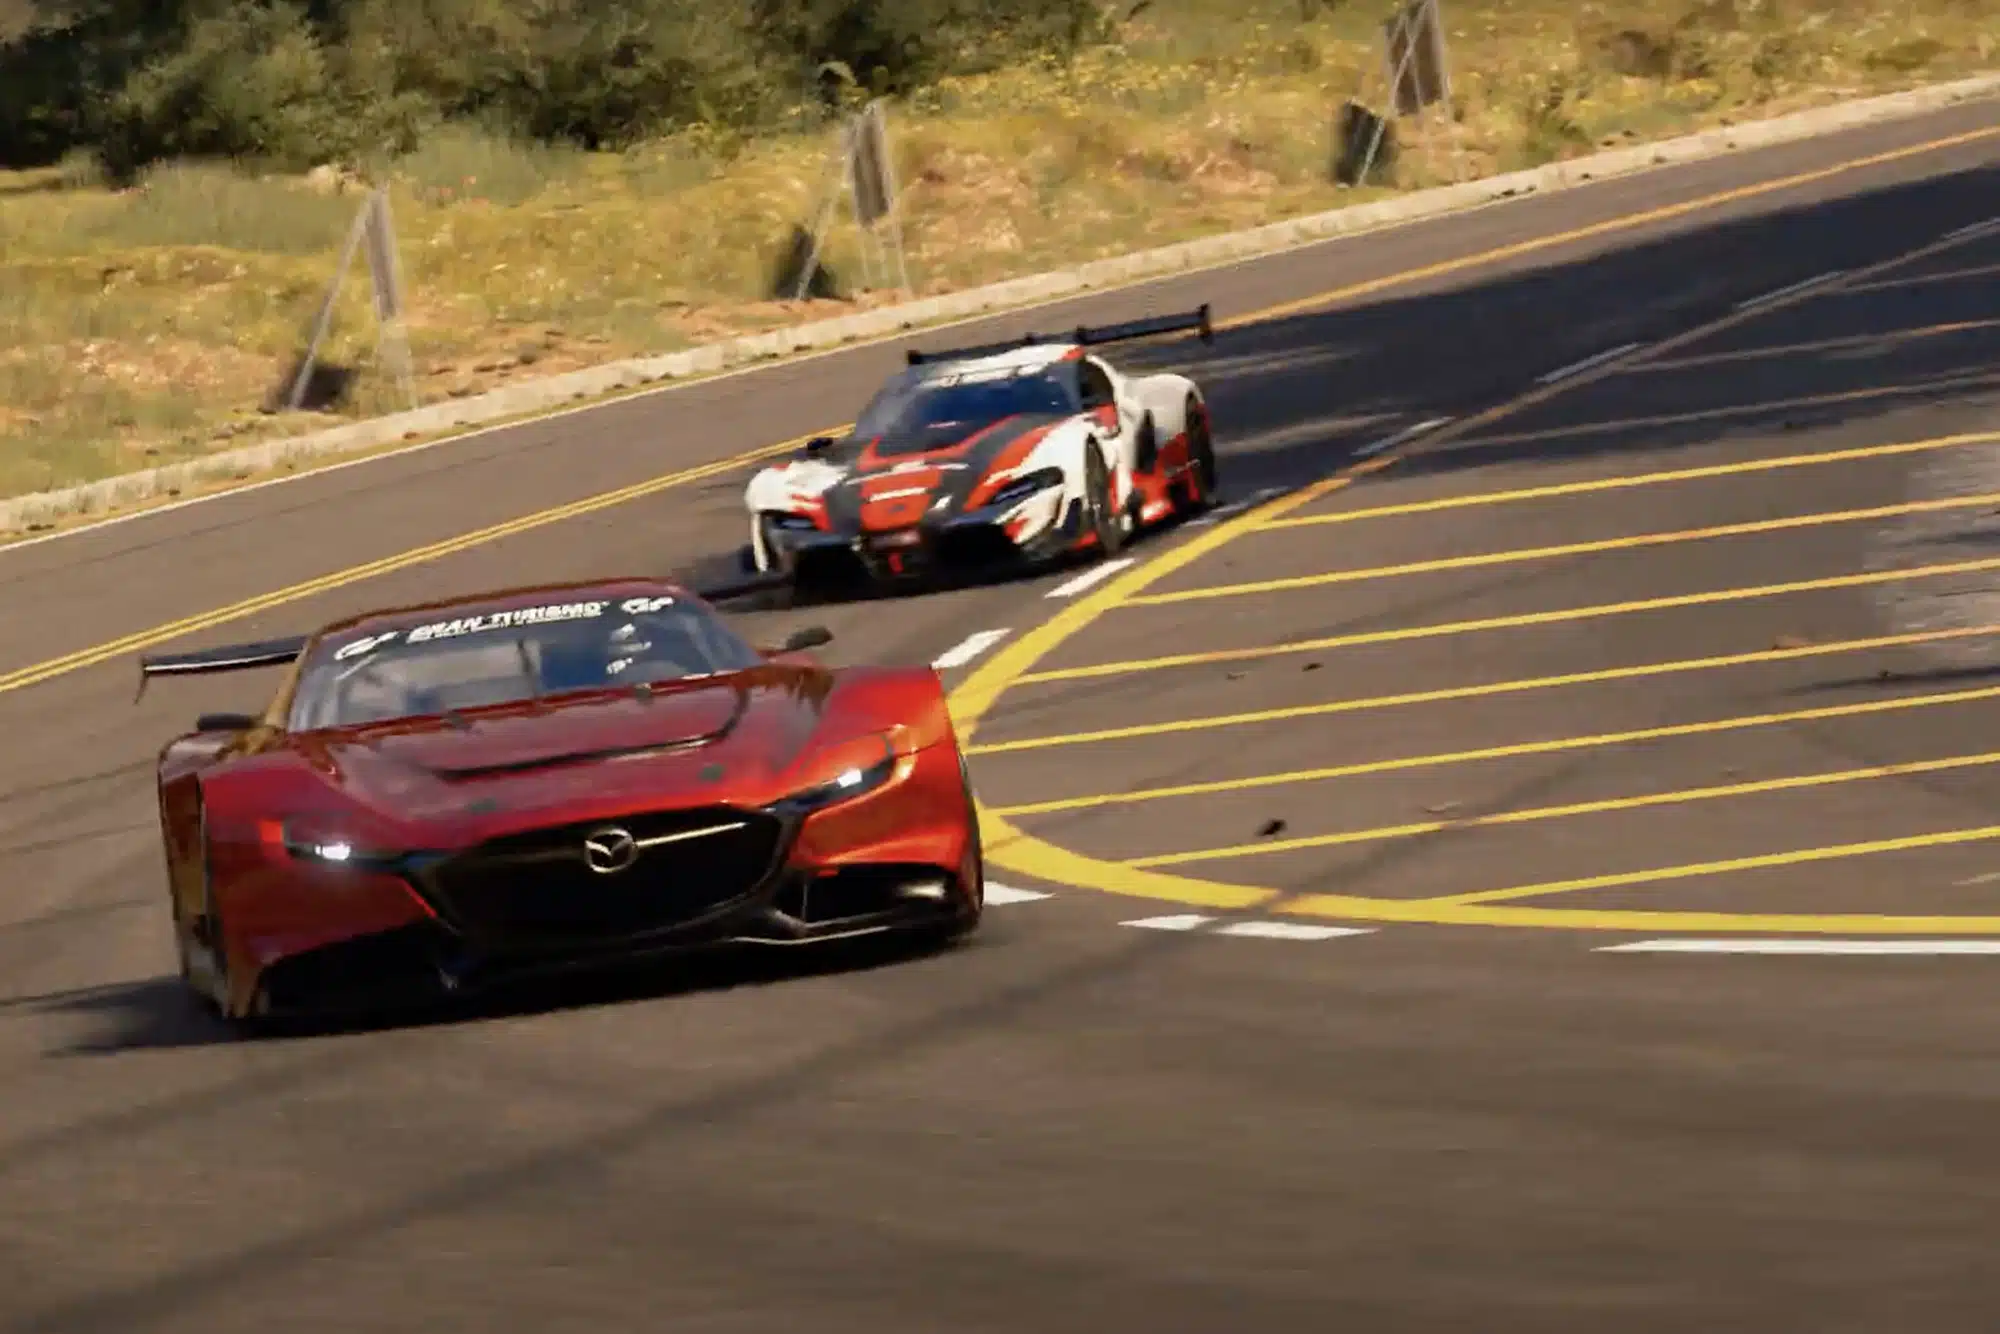 Gran Turismo 7 is coming to PlayStation 5